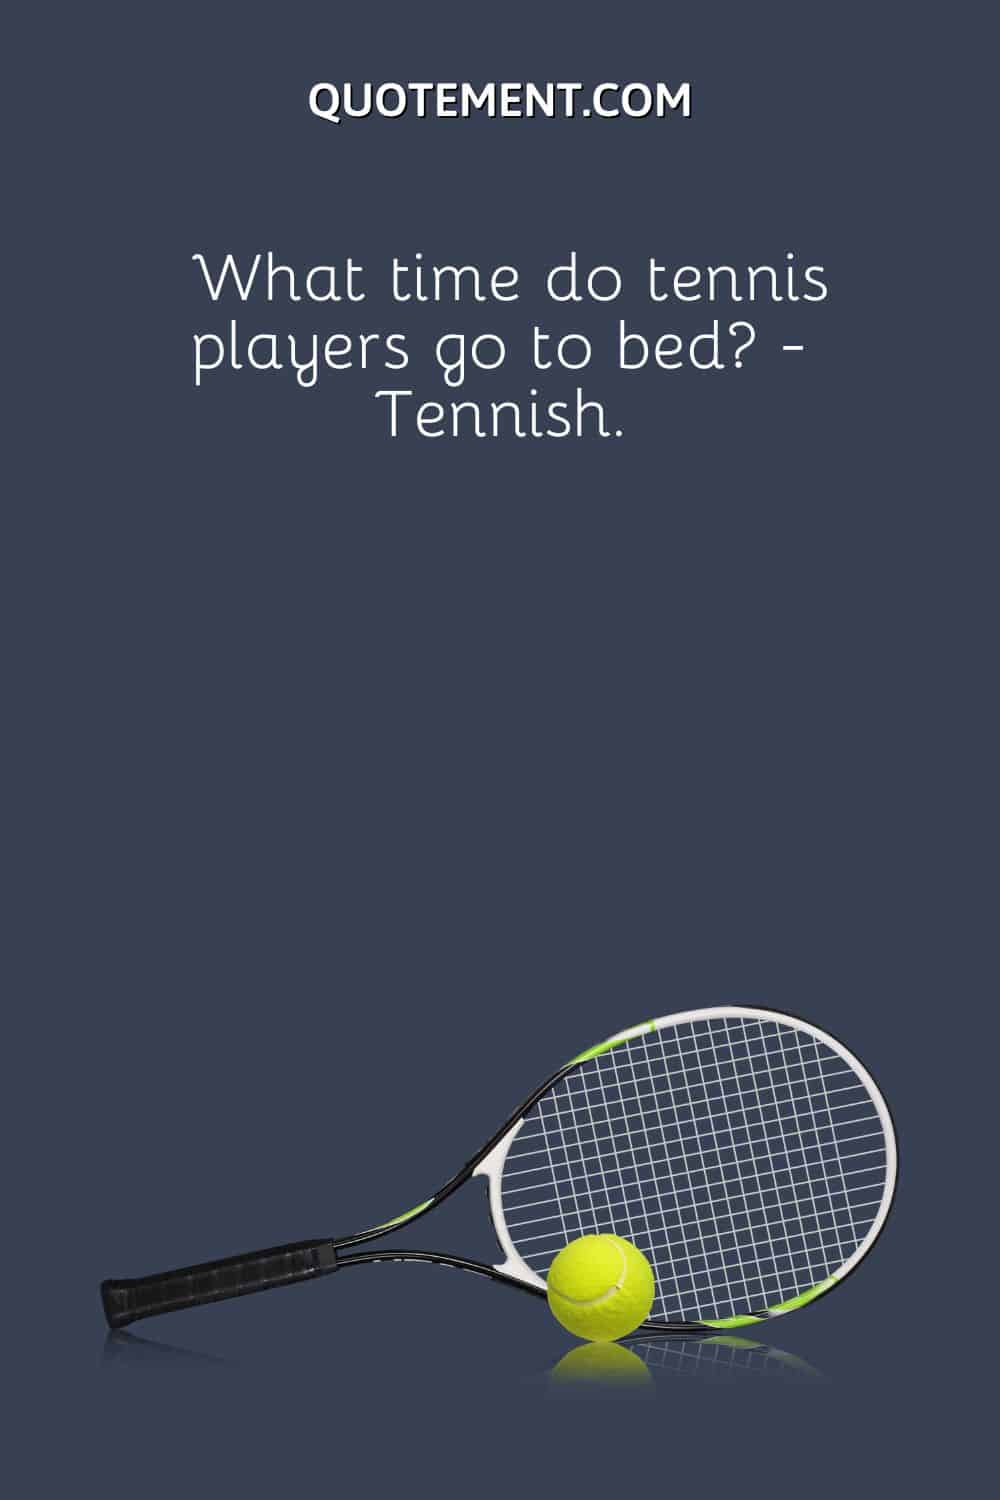 What time do tennis players go to bed - Tennish.